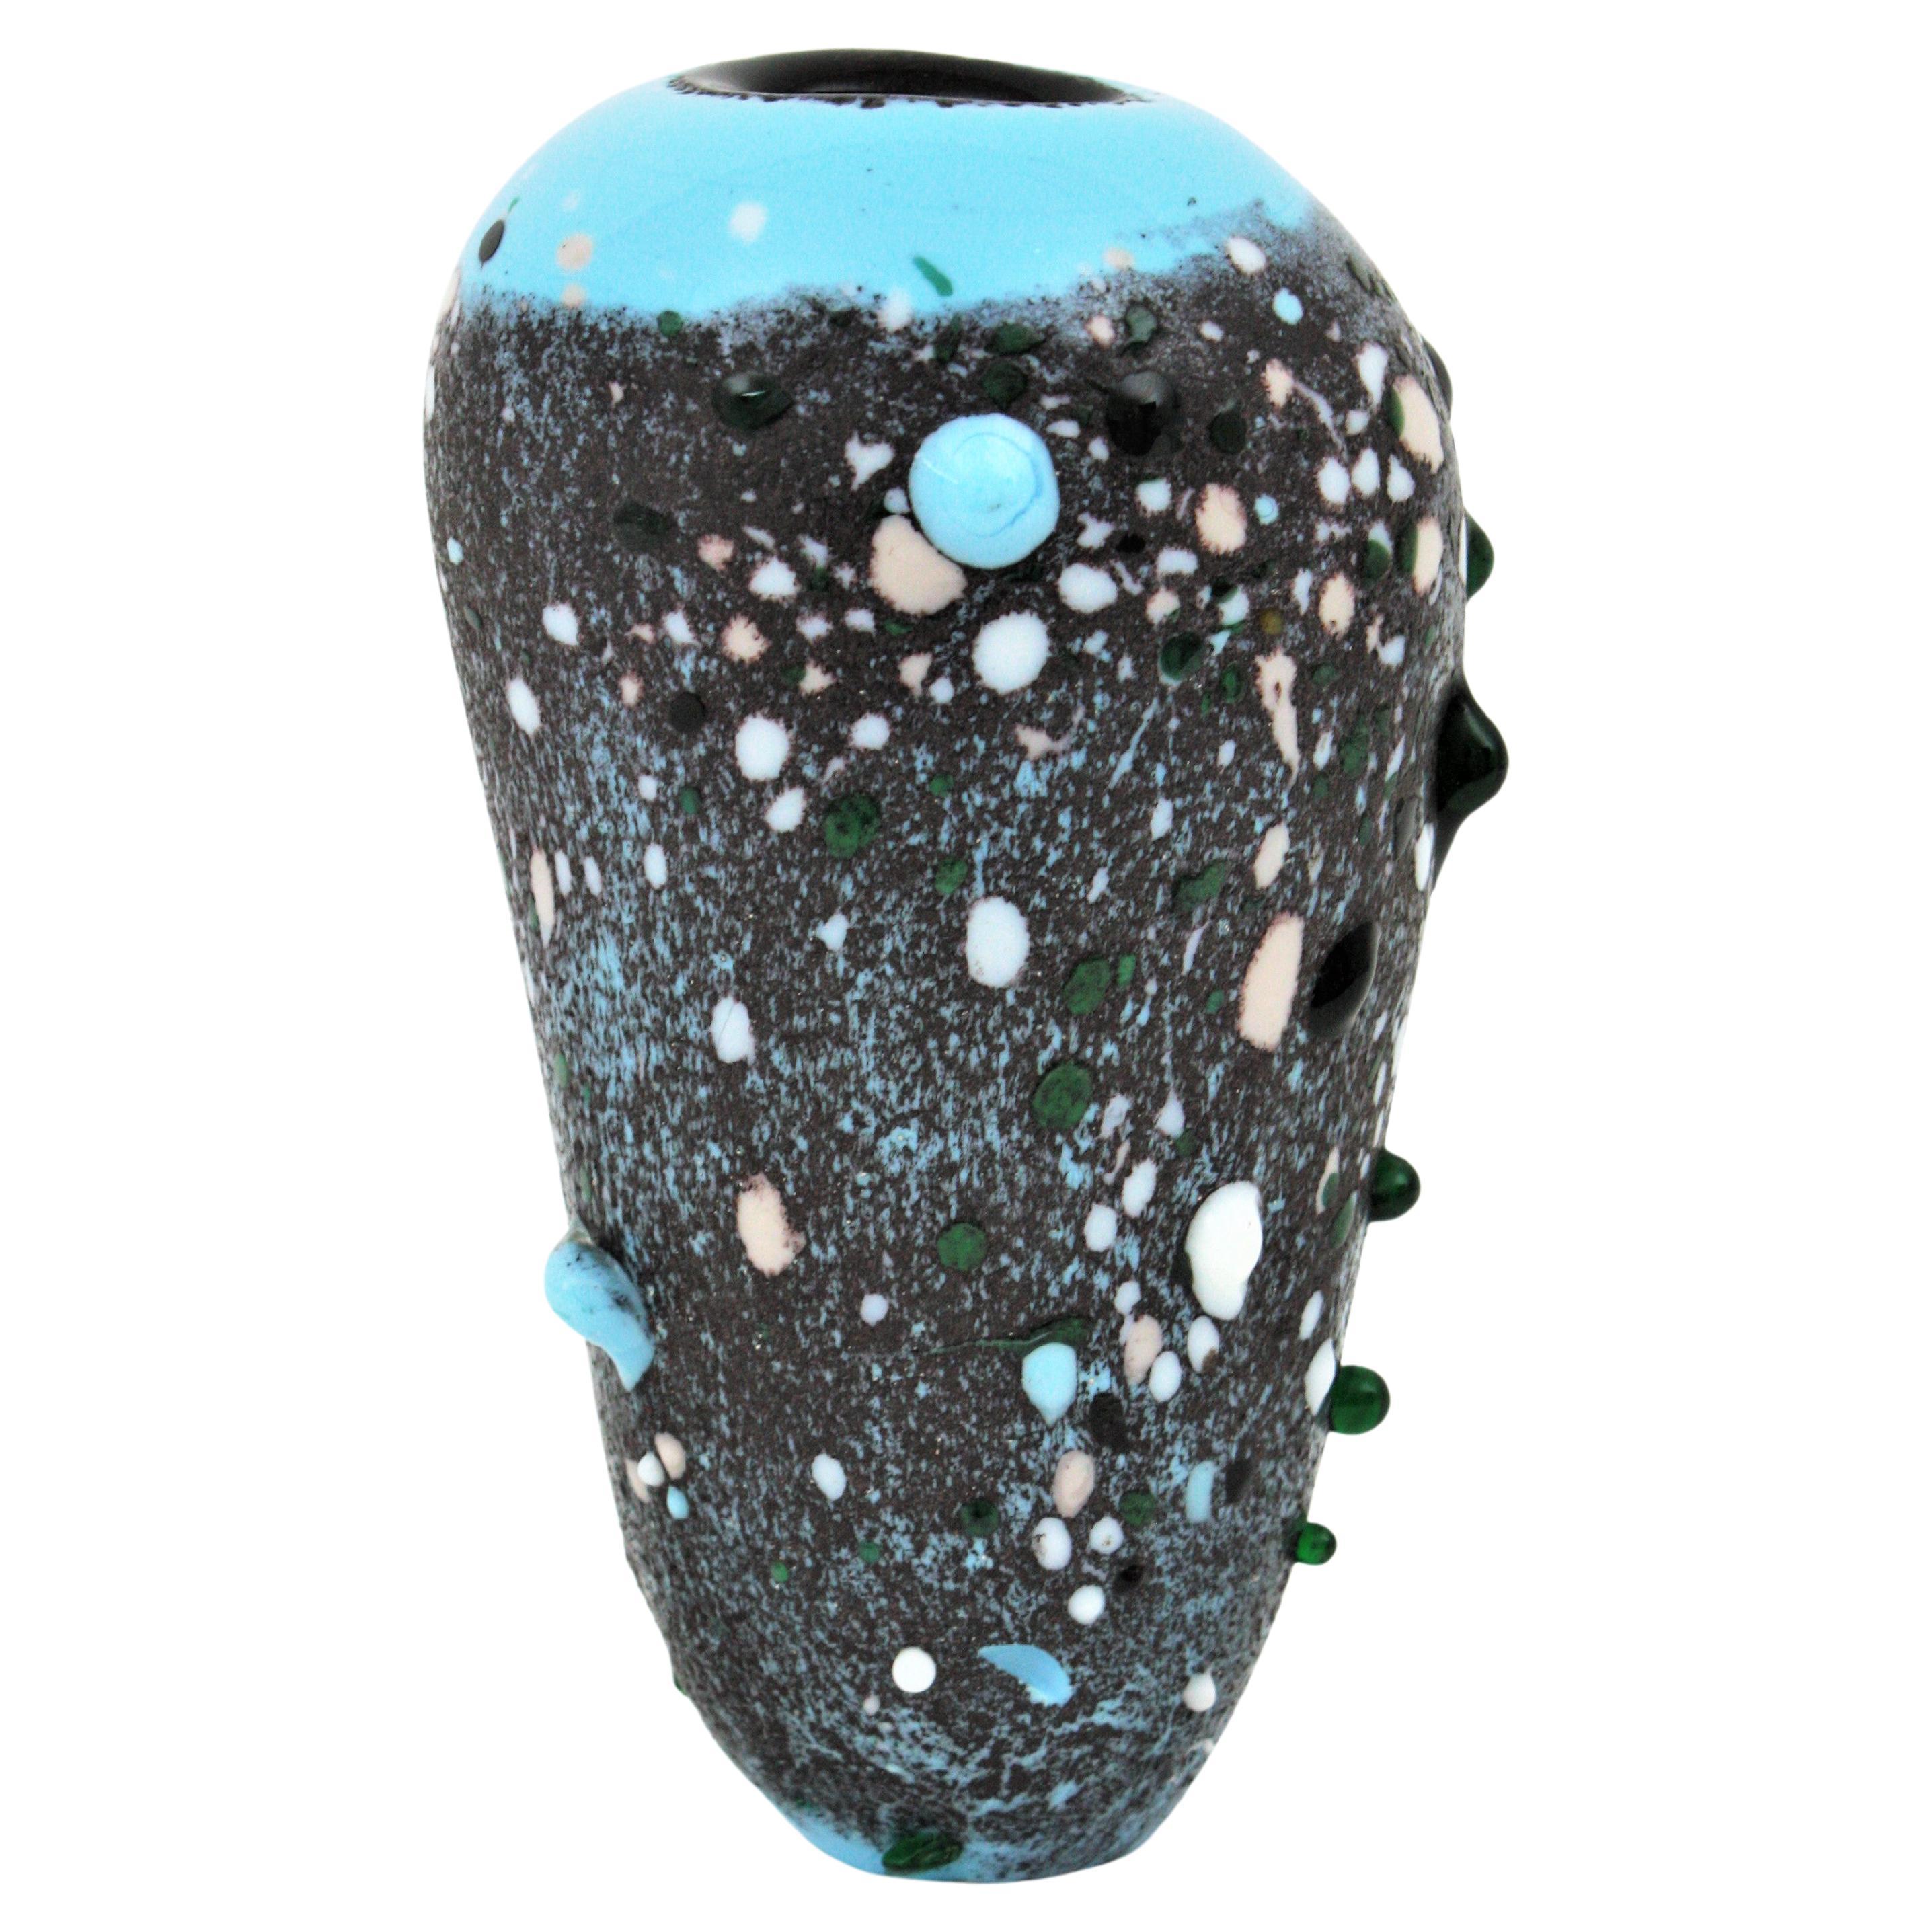 Handblown Murano art glass ovoid vase with murrina applied glass drops. Italy, 1950s.
This eye-catching Murano vase has an interior part in black glass covered by a layer in soft blue and gray glass. The beauty of this vase is highlighted by